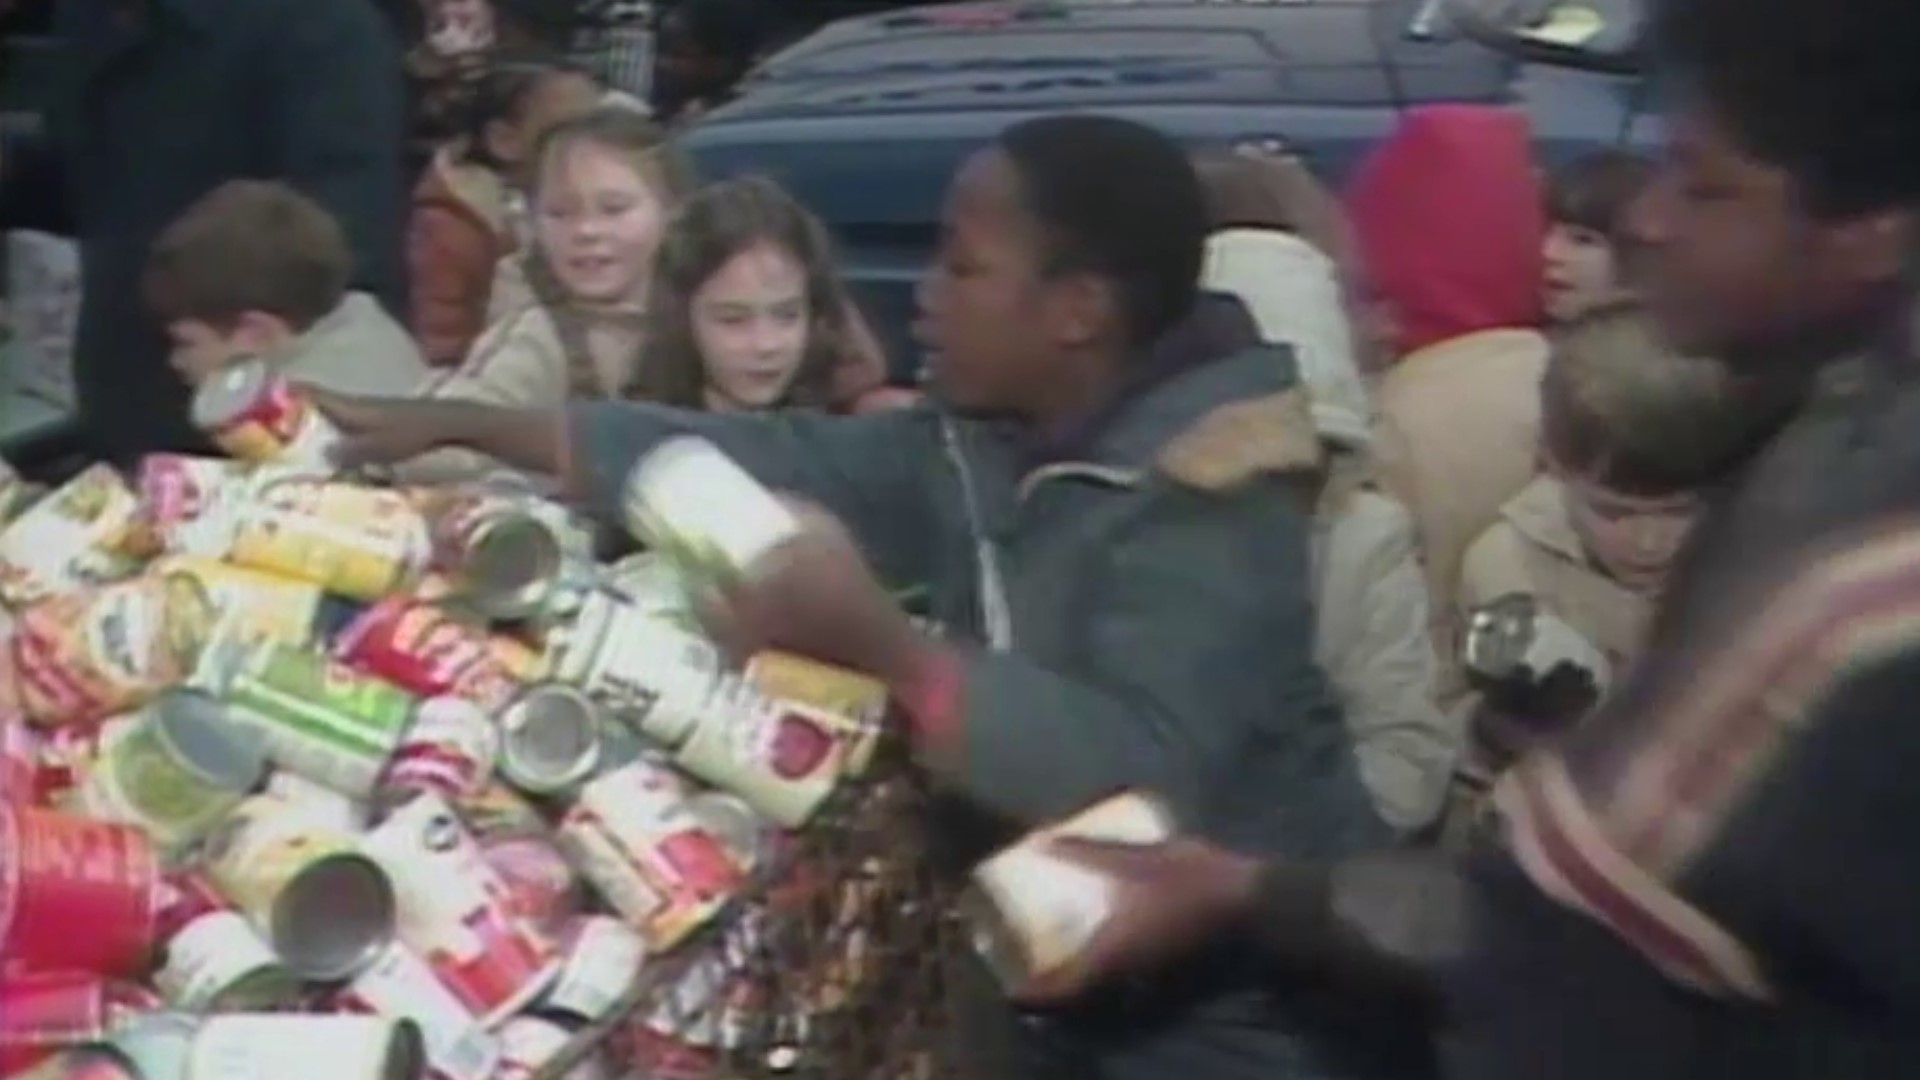 40 years ago, 11Alive reached out to the Salvation Army about partnering to collect food for those in need. Thus, started the annual Holiday Can-A-Thon.